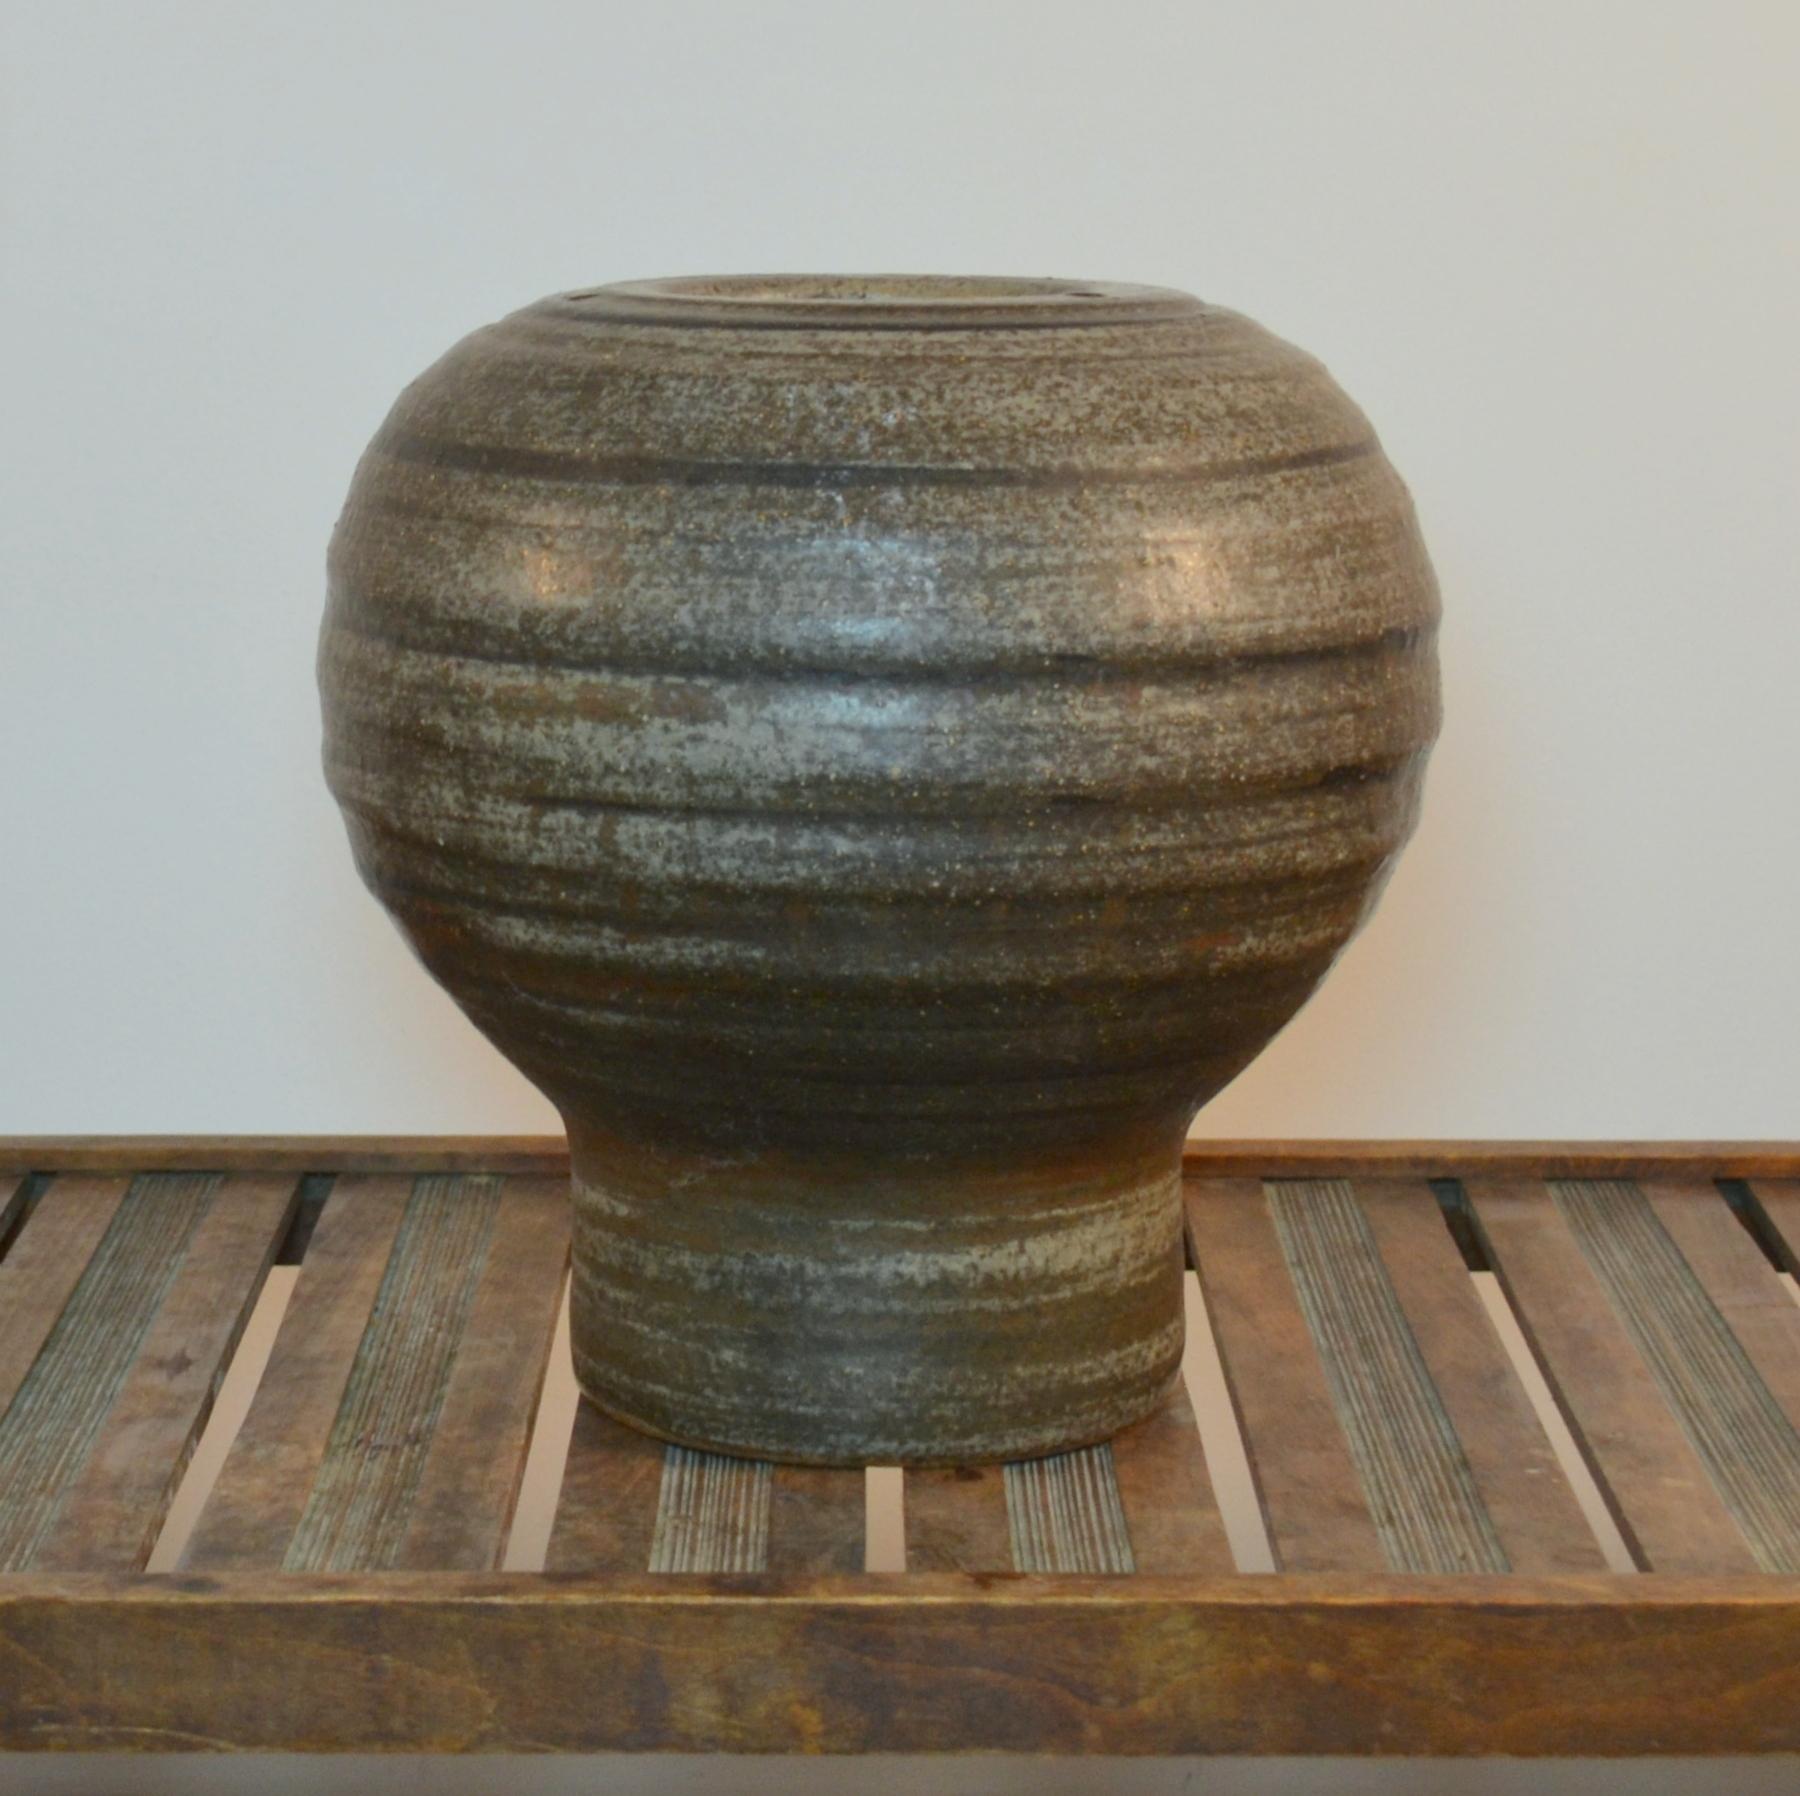 Large ball shape sculptural Studio Pottery vase created on the turning wheel by highly technical skilled Dutch ceramist Piet Knepper in the 1980's. The glaze in tones of grey is created by natural resources and is highly influenced by leading